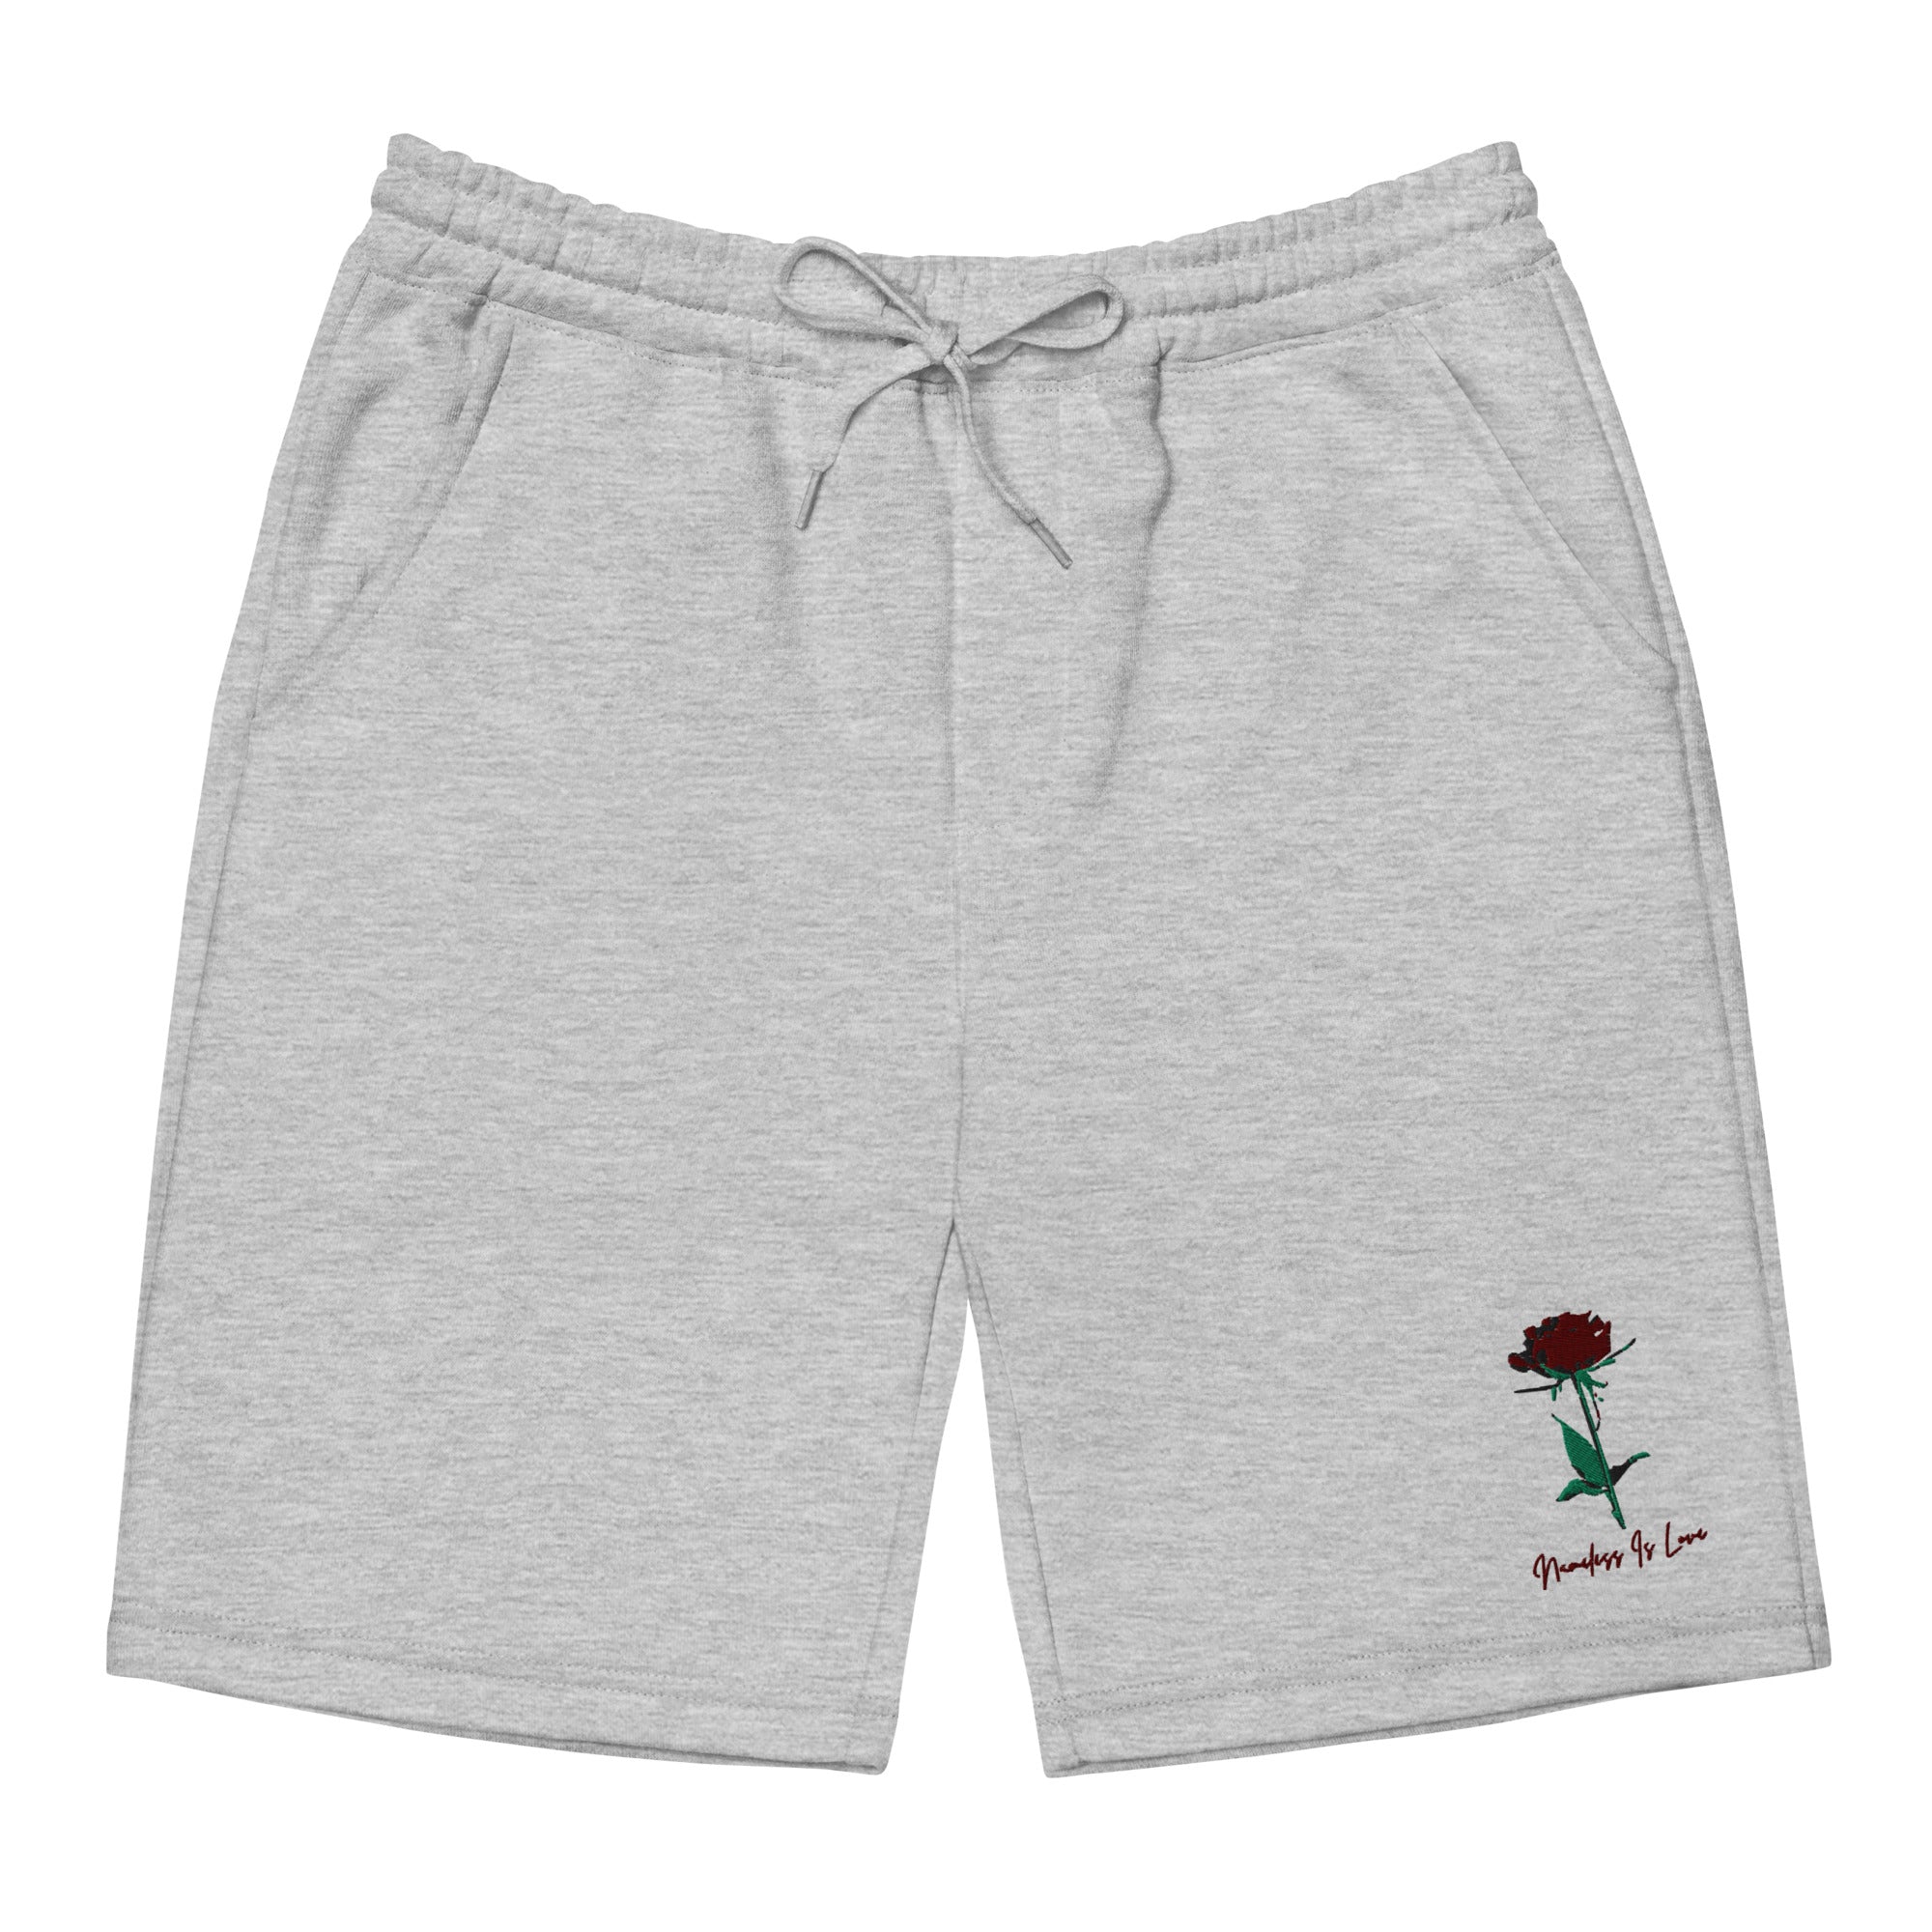 EMBROIDERED “NAMELESS IS LOVE” FLEECE SHORTS [GREY]